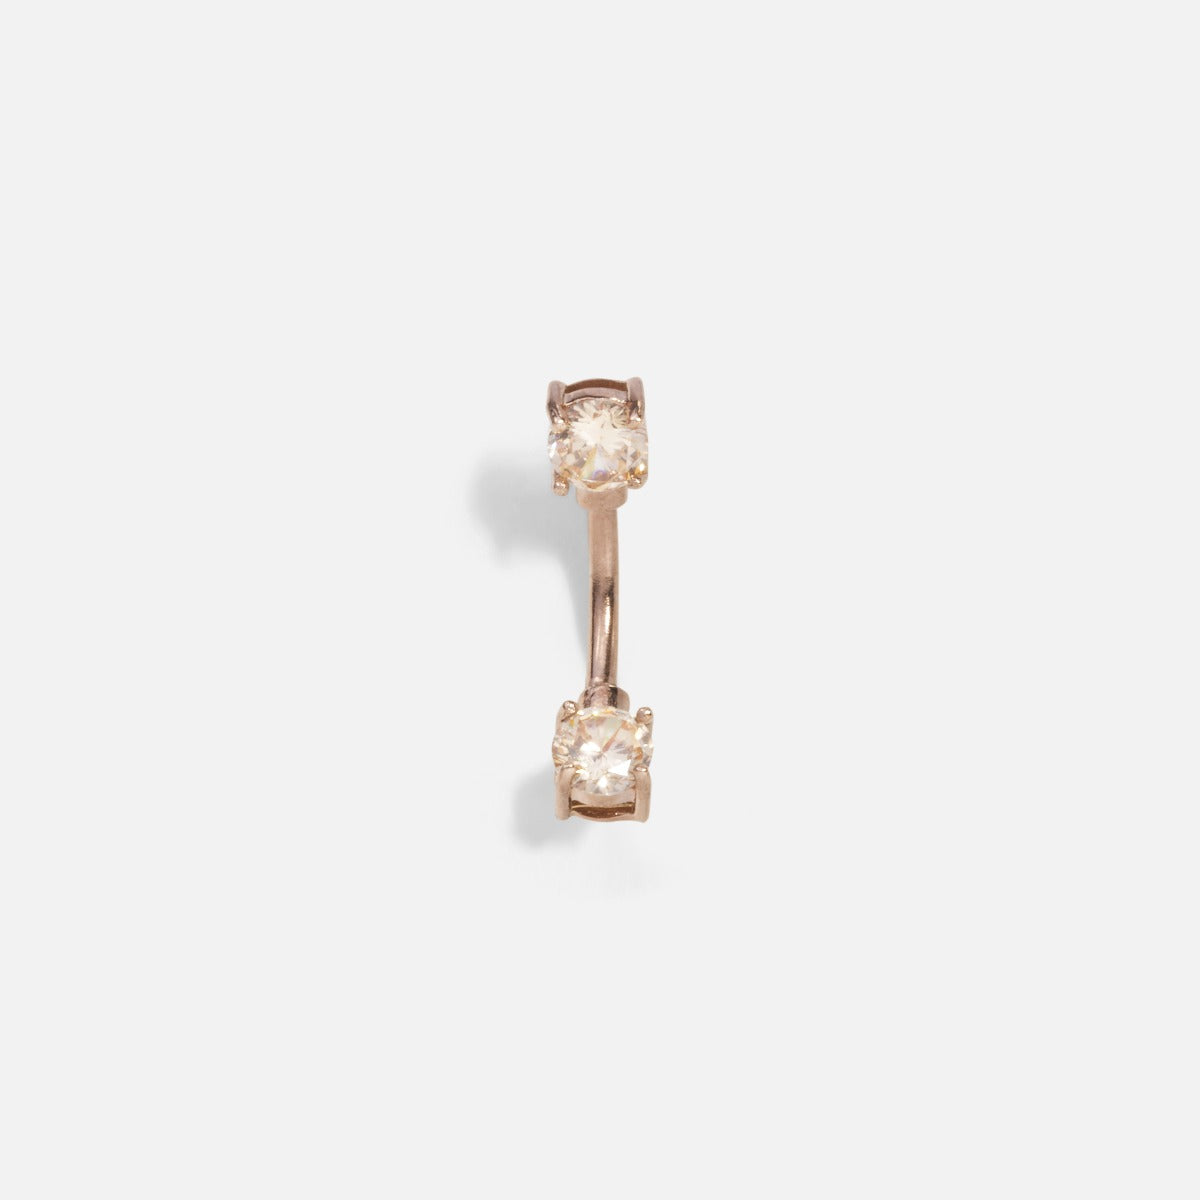 Rose gold stainless steel belly button ring with cubic zirconia stones duo